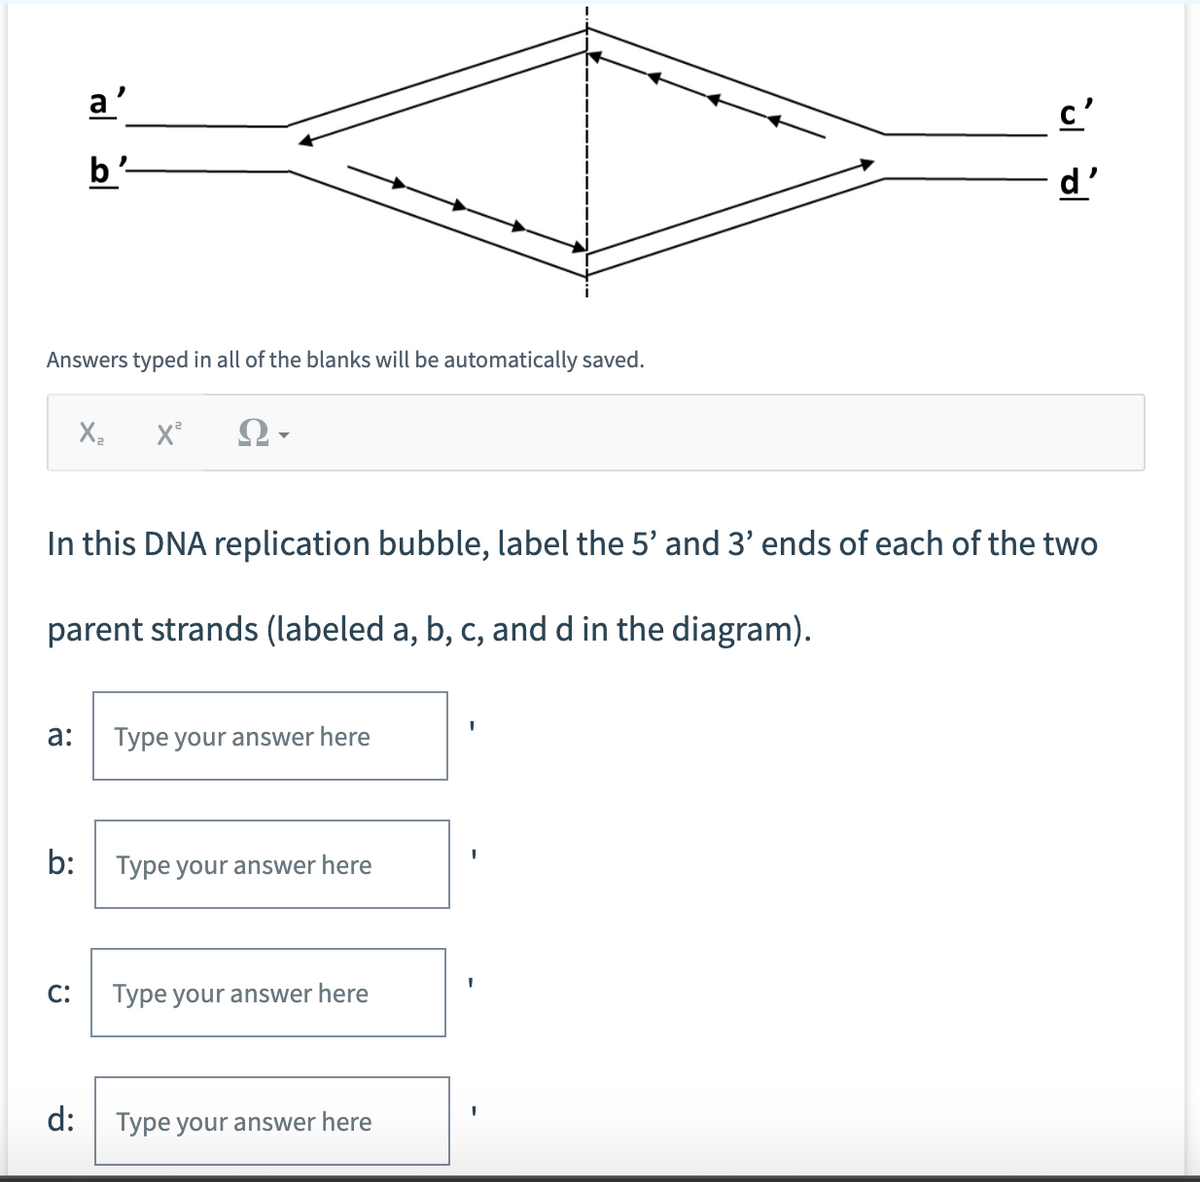 Answers typed in all of the blanks will be automatically saved.
a:
b:
a'
b'
C:
In this DNA replication bubble, label the 5' and 3' ends of each of the two
parent strands (labeled a, b, c, and d in the diagram).
d:
X₂ X² Ω·
Type your answer here
Type your answer here
Type your answer here
u
Type your answer here
d'